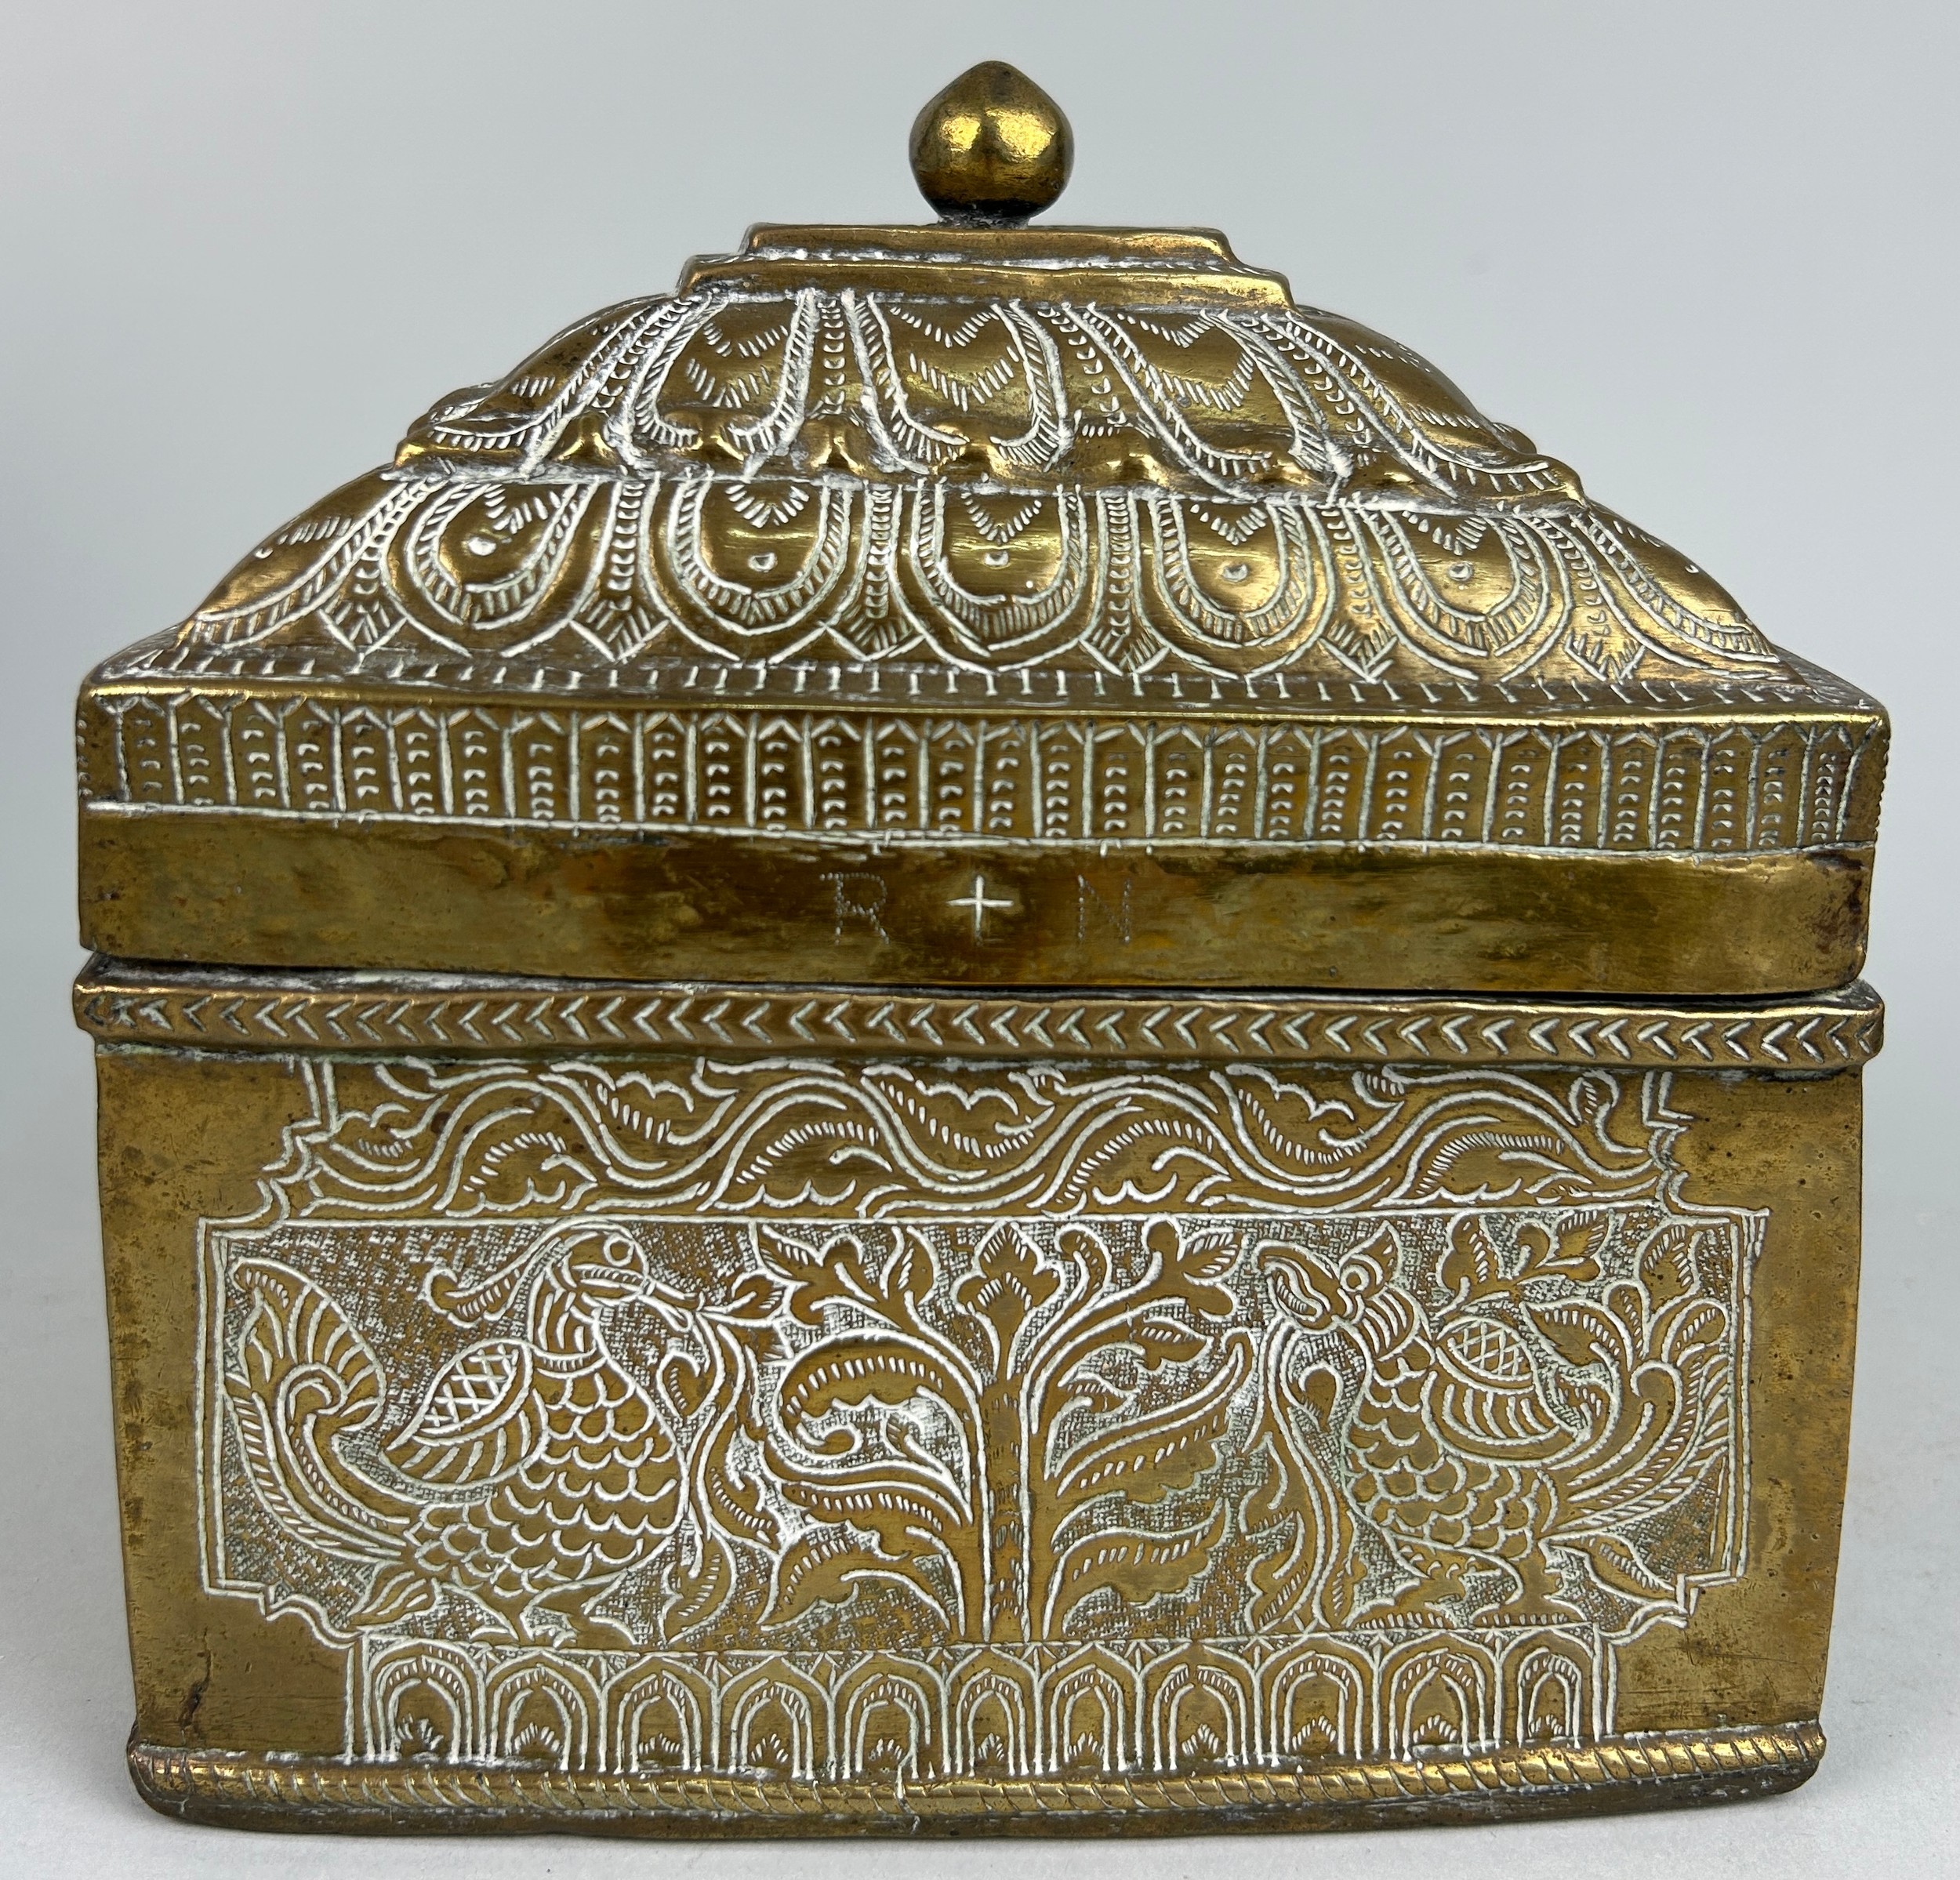 A 19TH CENTURY BRASS CASKET POSSIBLY INDIAN OR KHAJAR DECORATED WITH PEACOCKS AND FOLIAGE, 17cm x